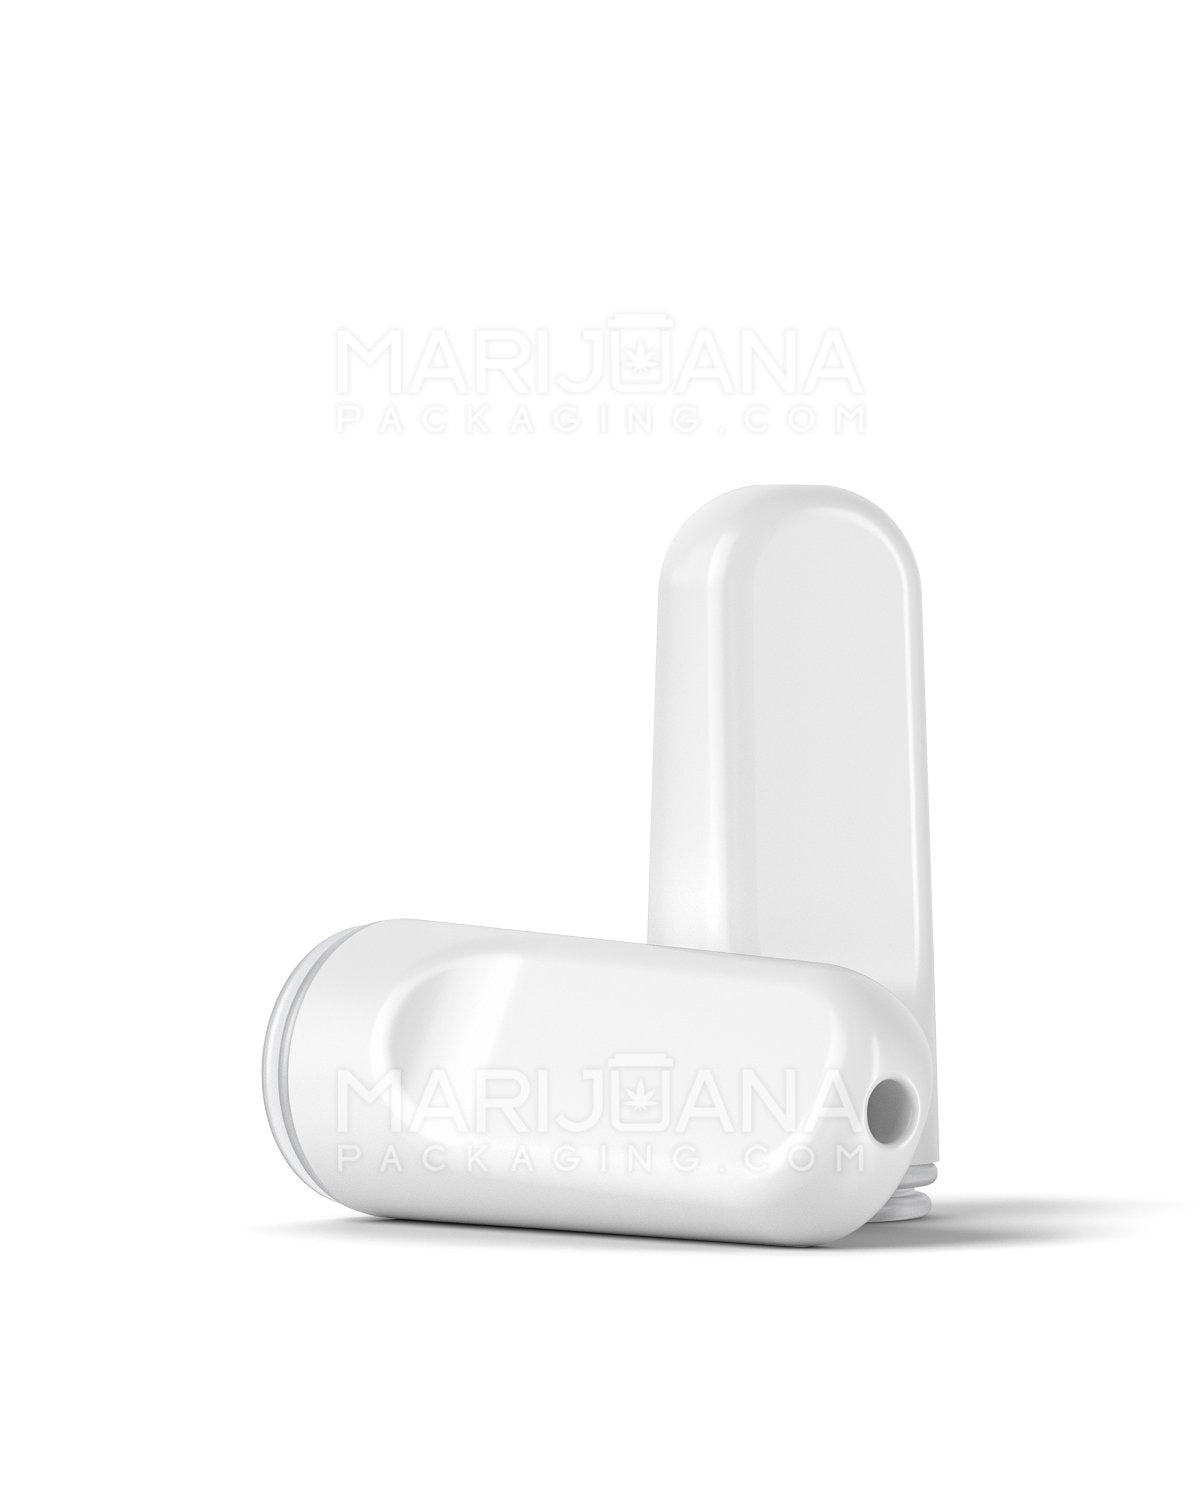 AVD | Flat Vape Mouthpiece for GoodCarts Glass Cartridges | White Ceramic - Screw On - 600 Count - 1